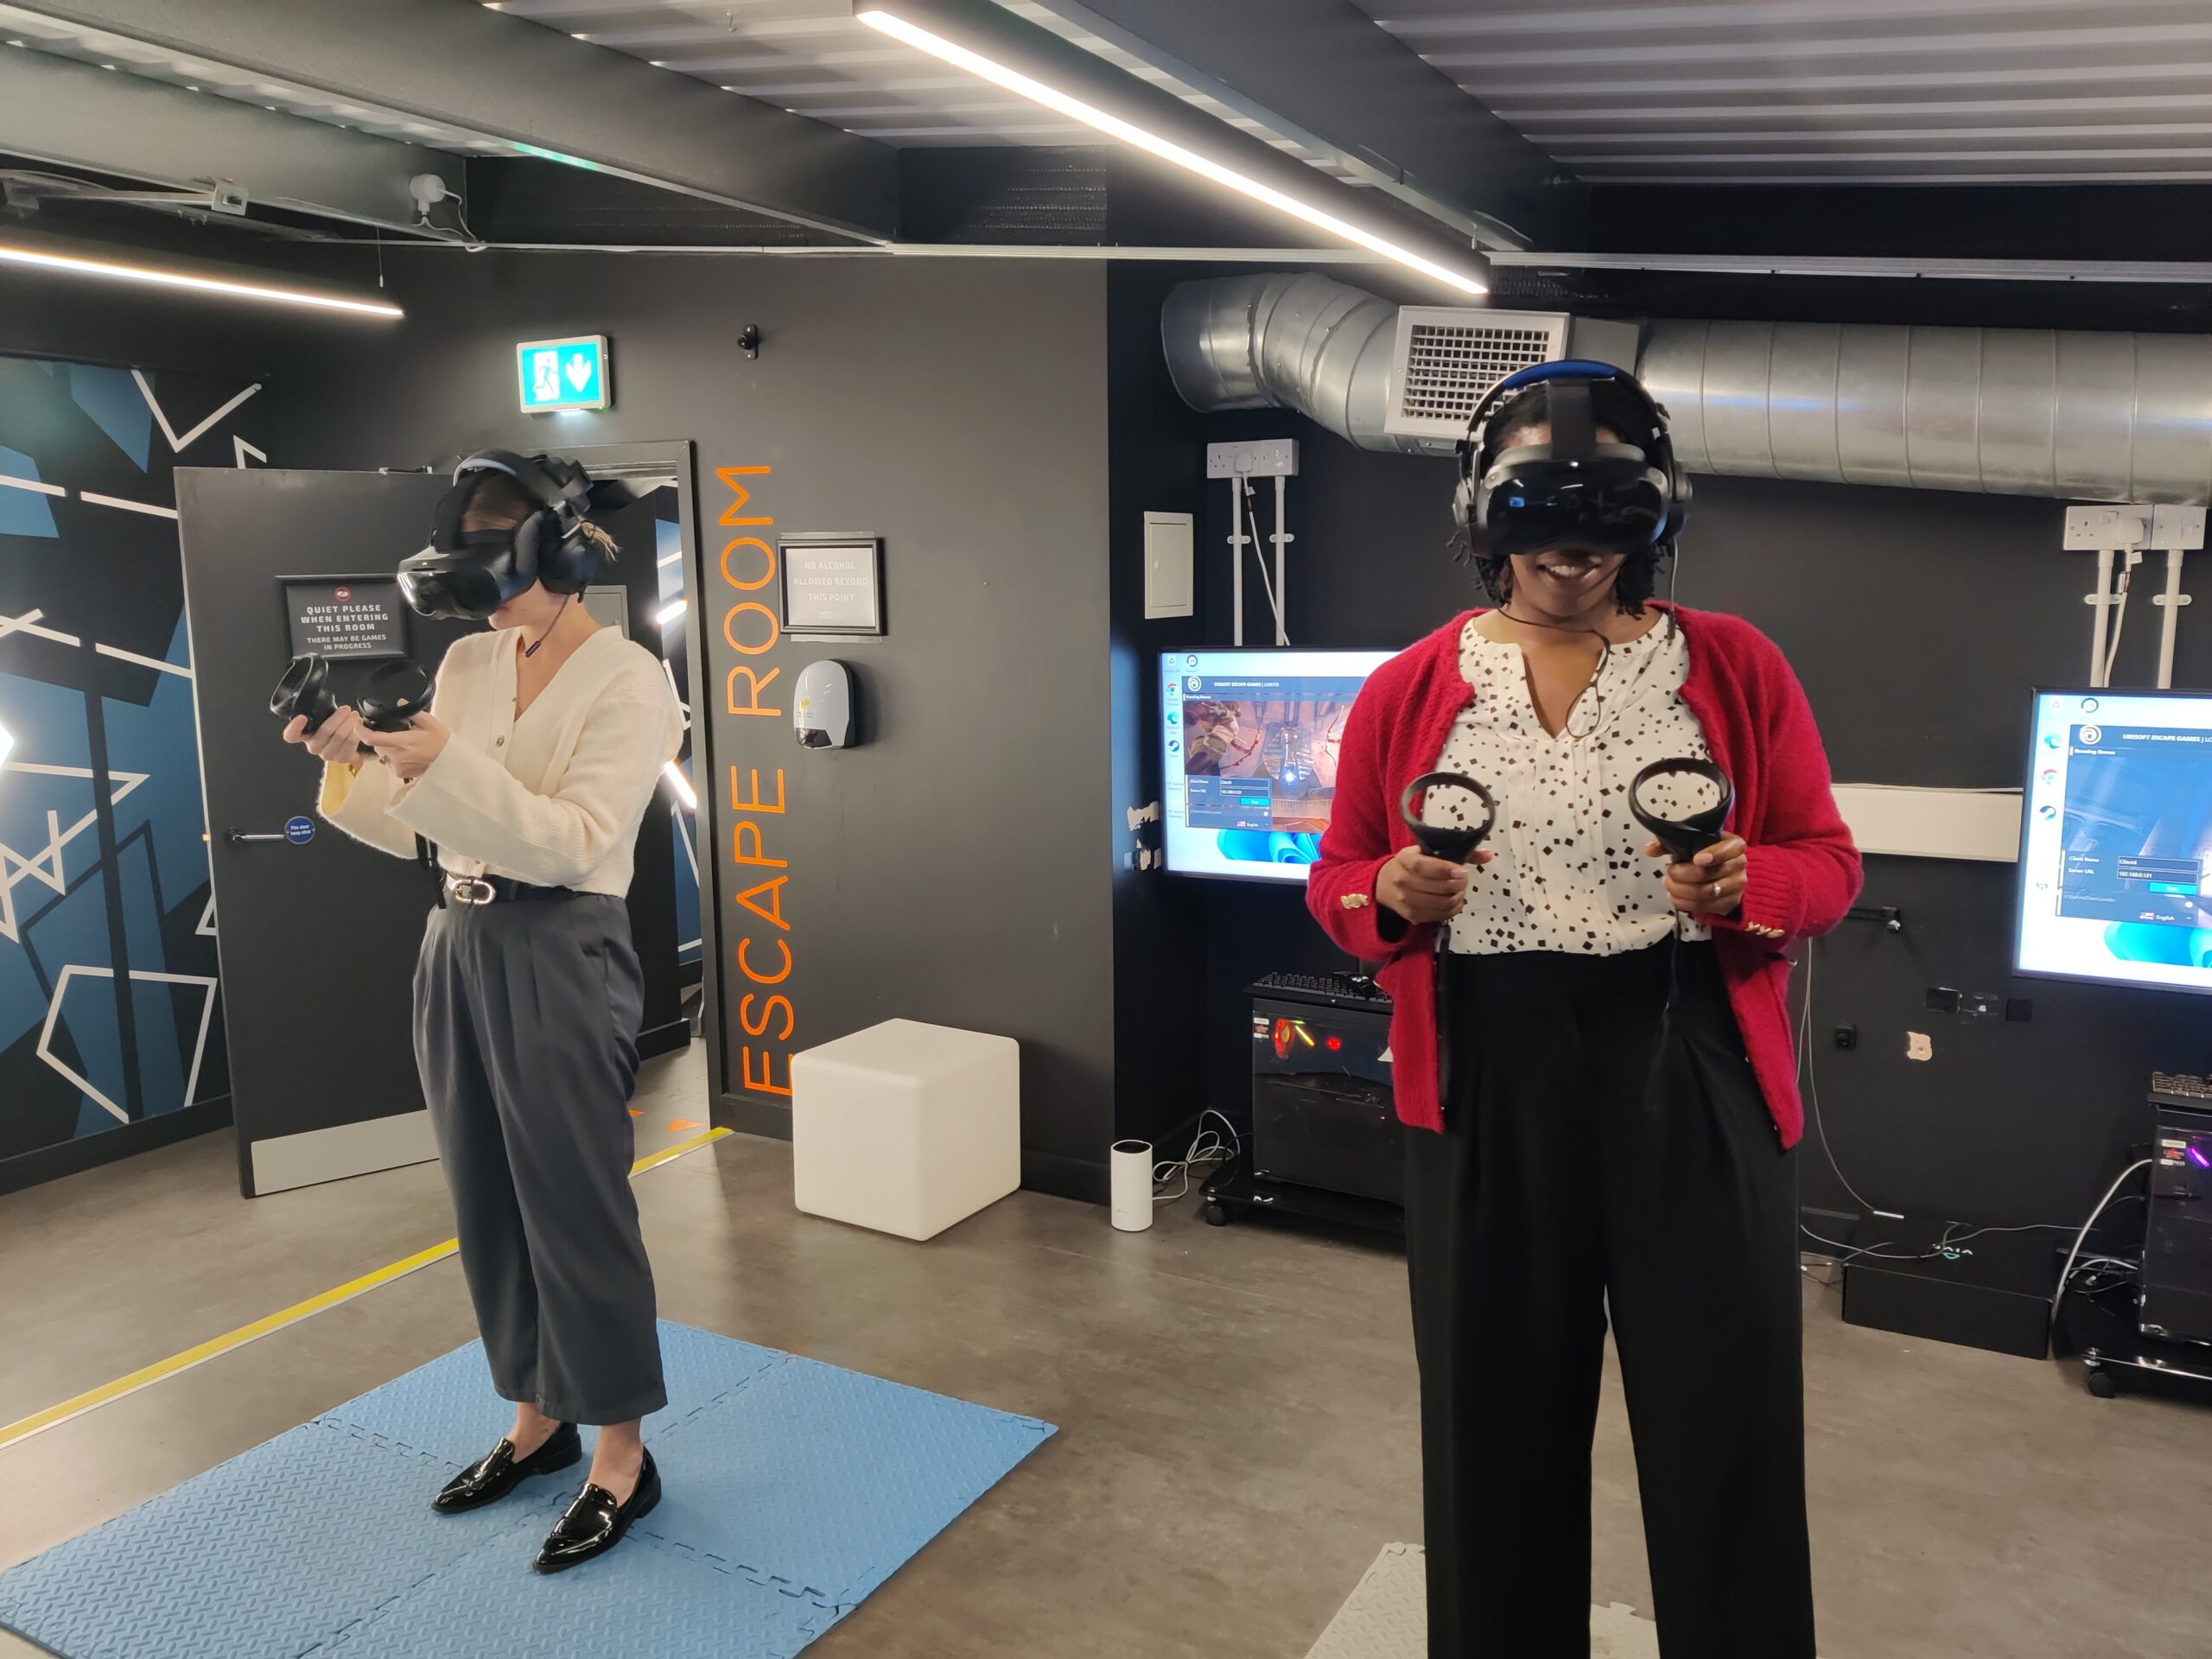 Co-founders charlie and janet using VR headset together